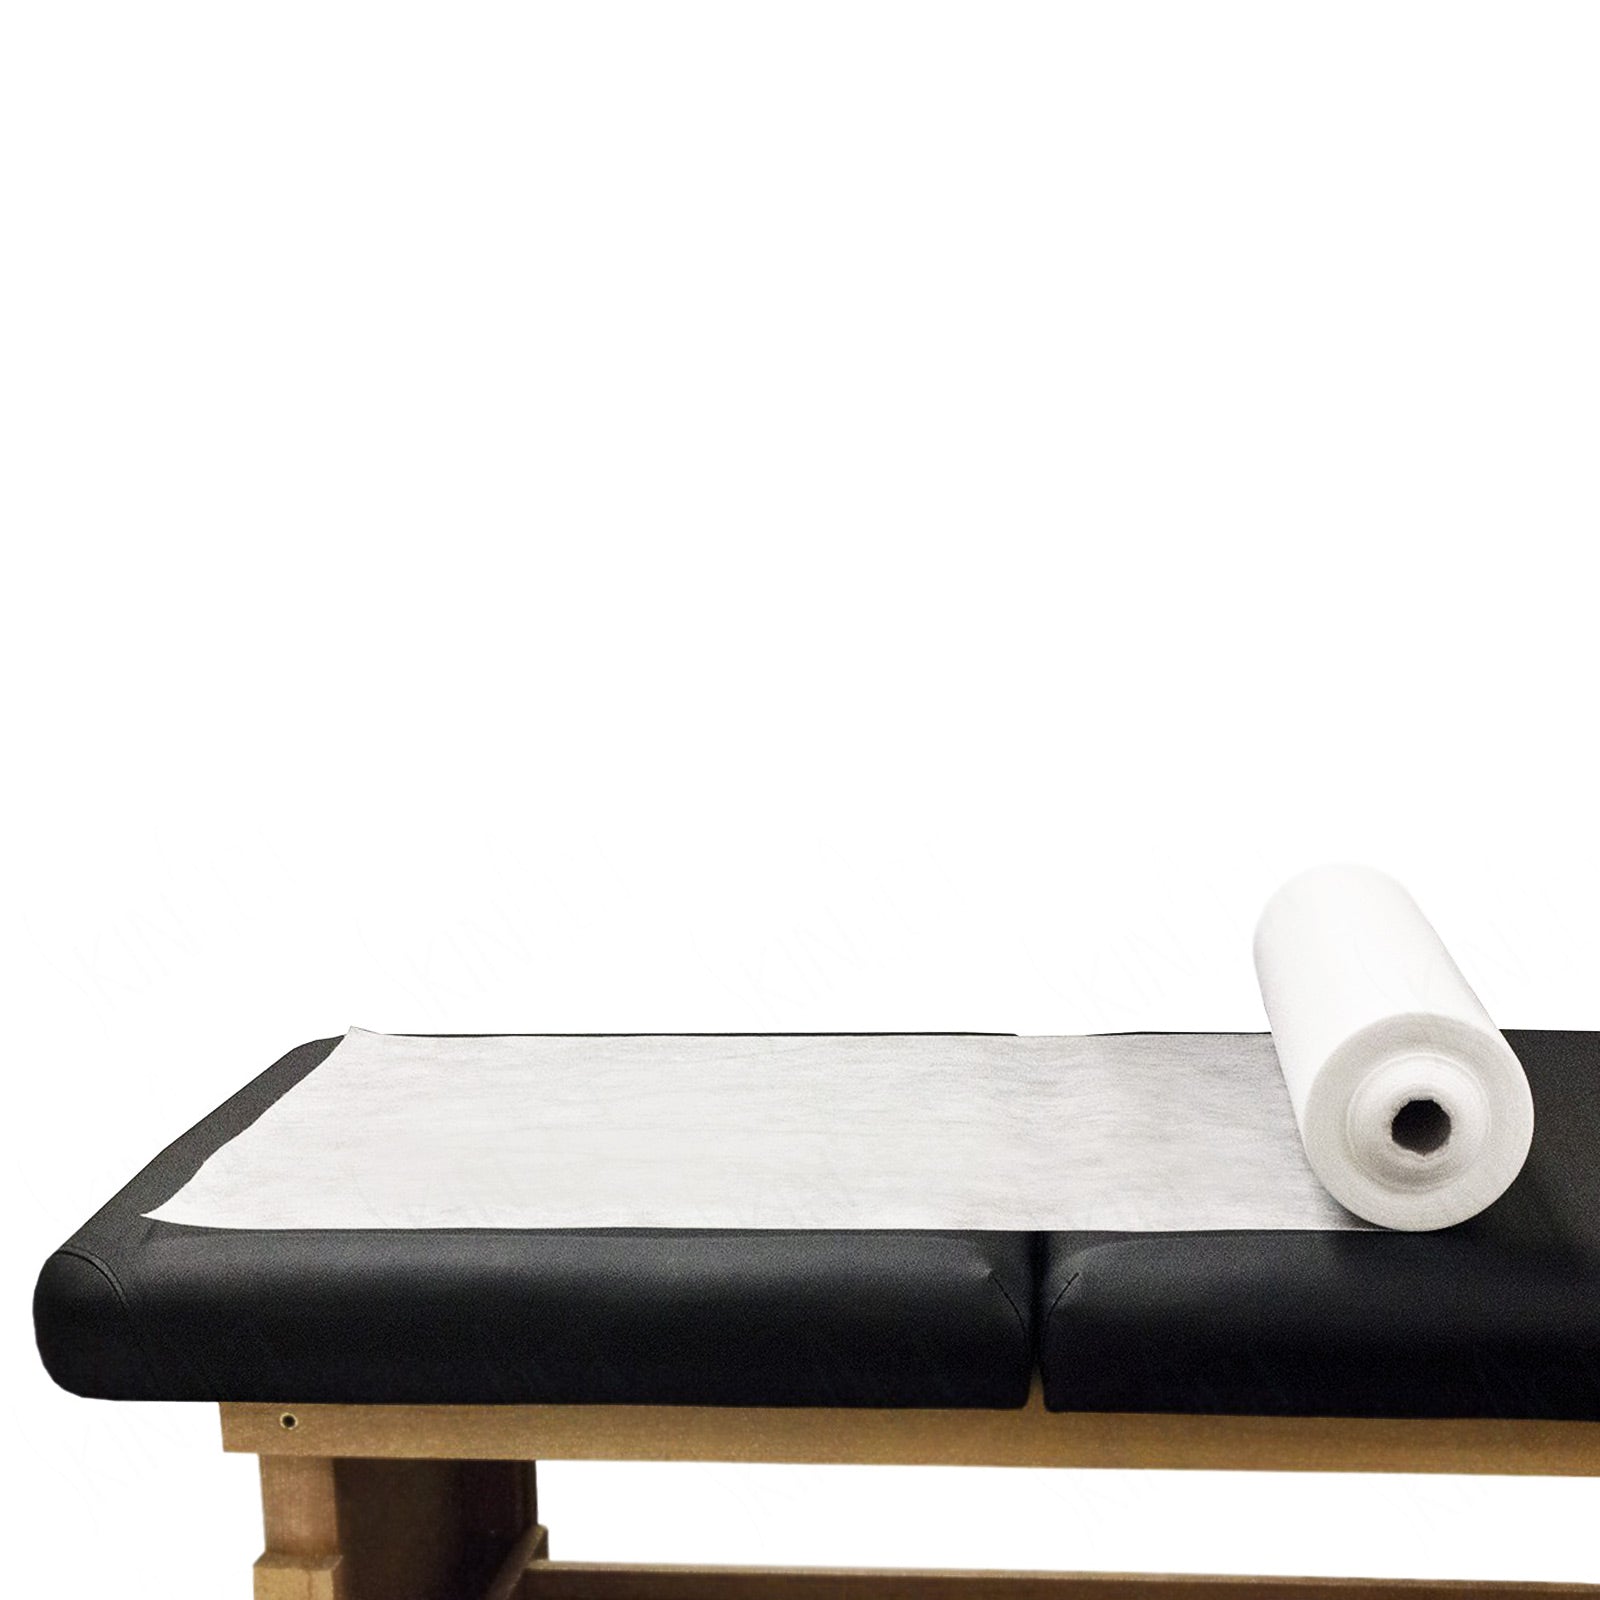 Forever Beauty 2 Rolls / 90pcs Disposable Massage Table Sheet Cover 180cm x 80cm - SILBERSHELL